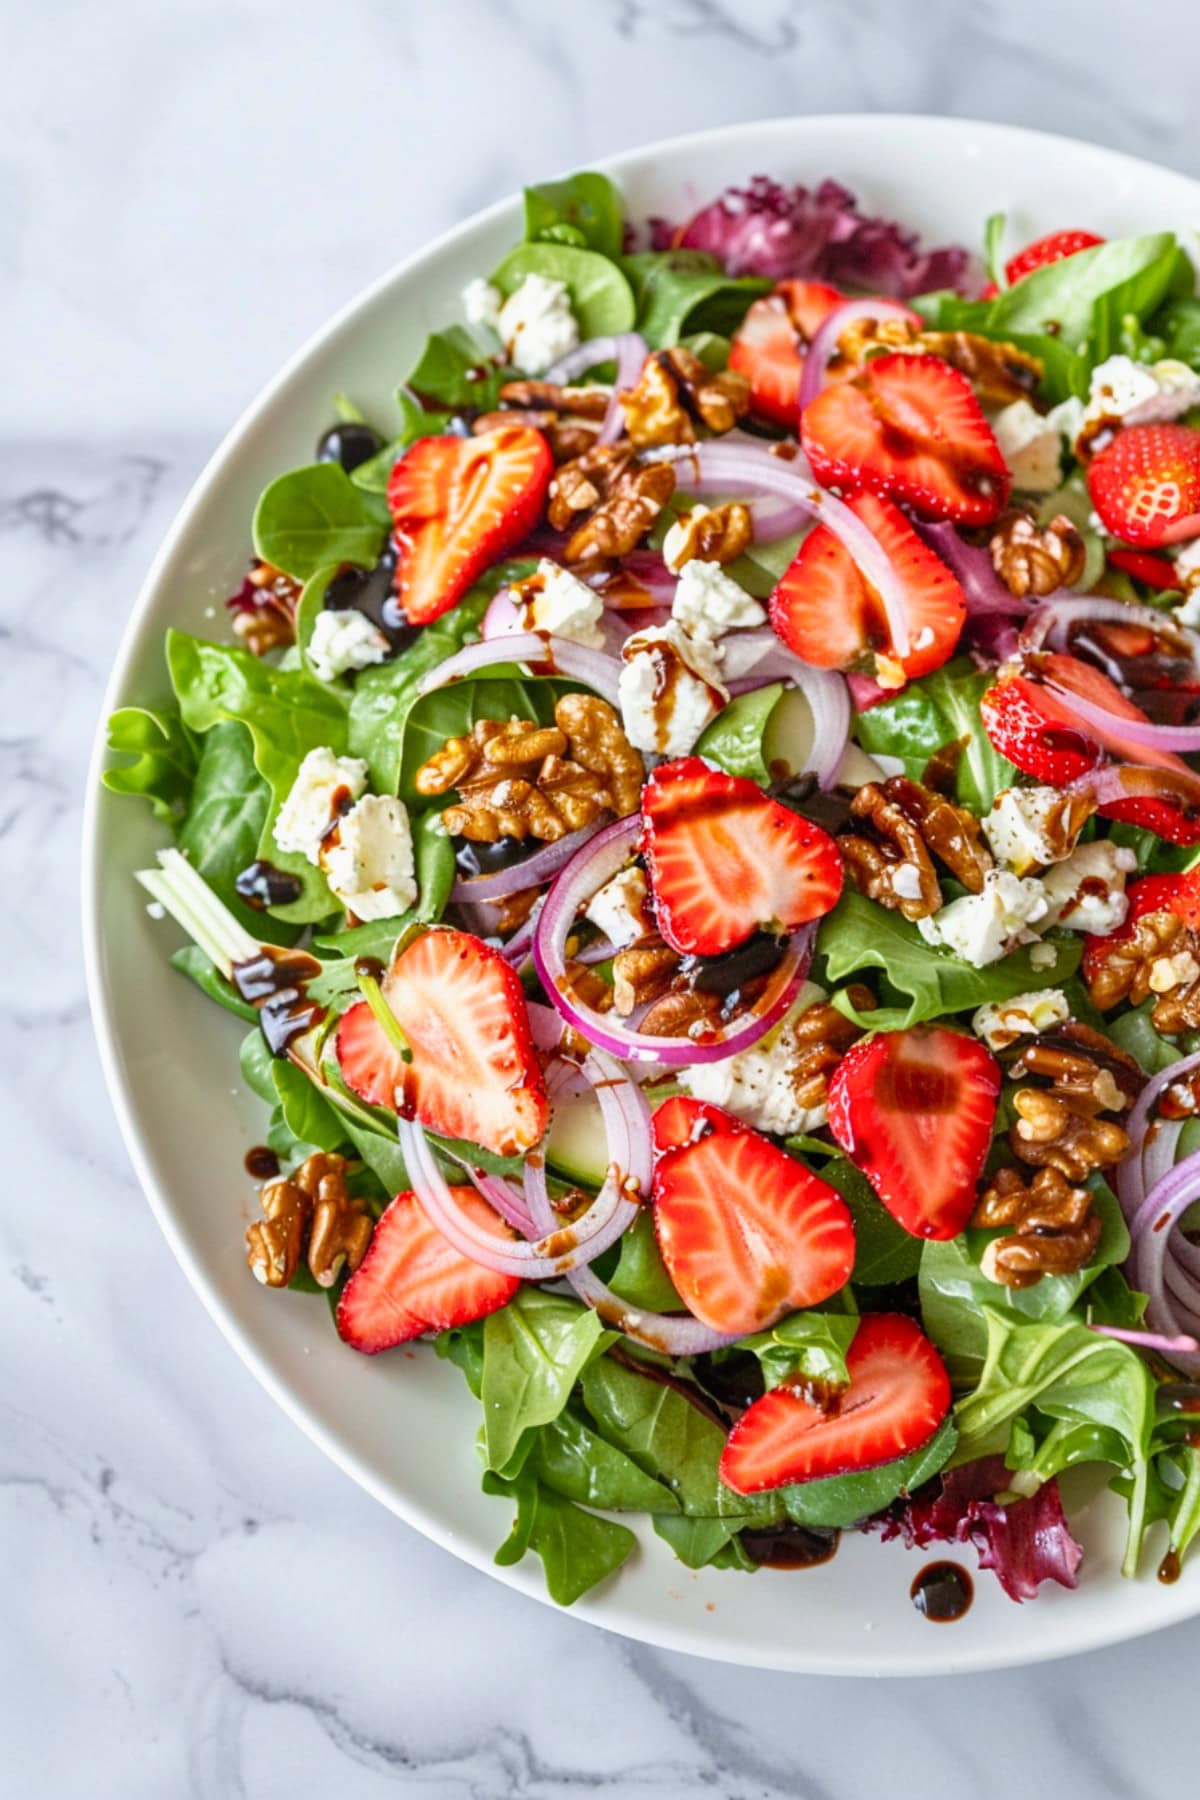 Strawberry goat cheese salad made with mixed greens, sliced strawberries, red onion, and toasted walnuts served in a white plate.